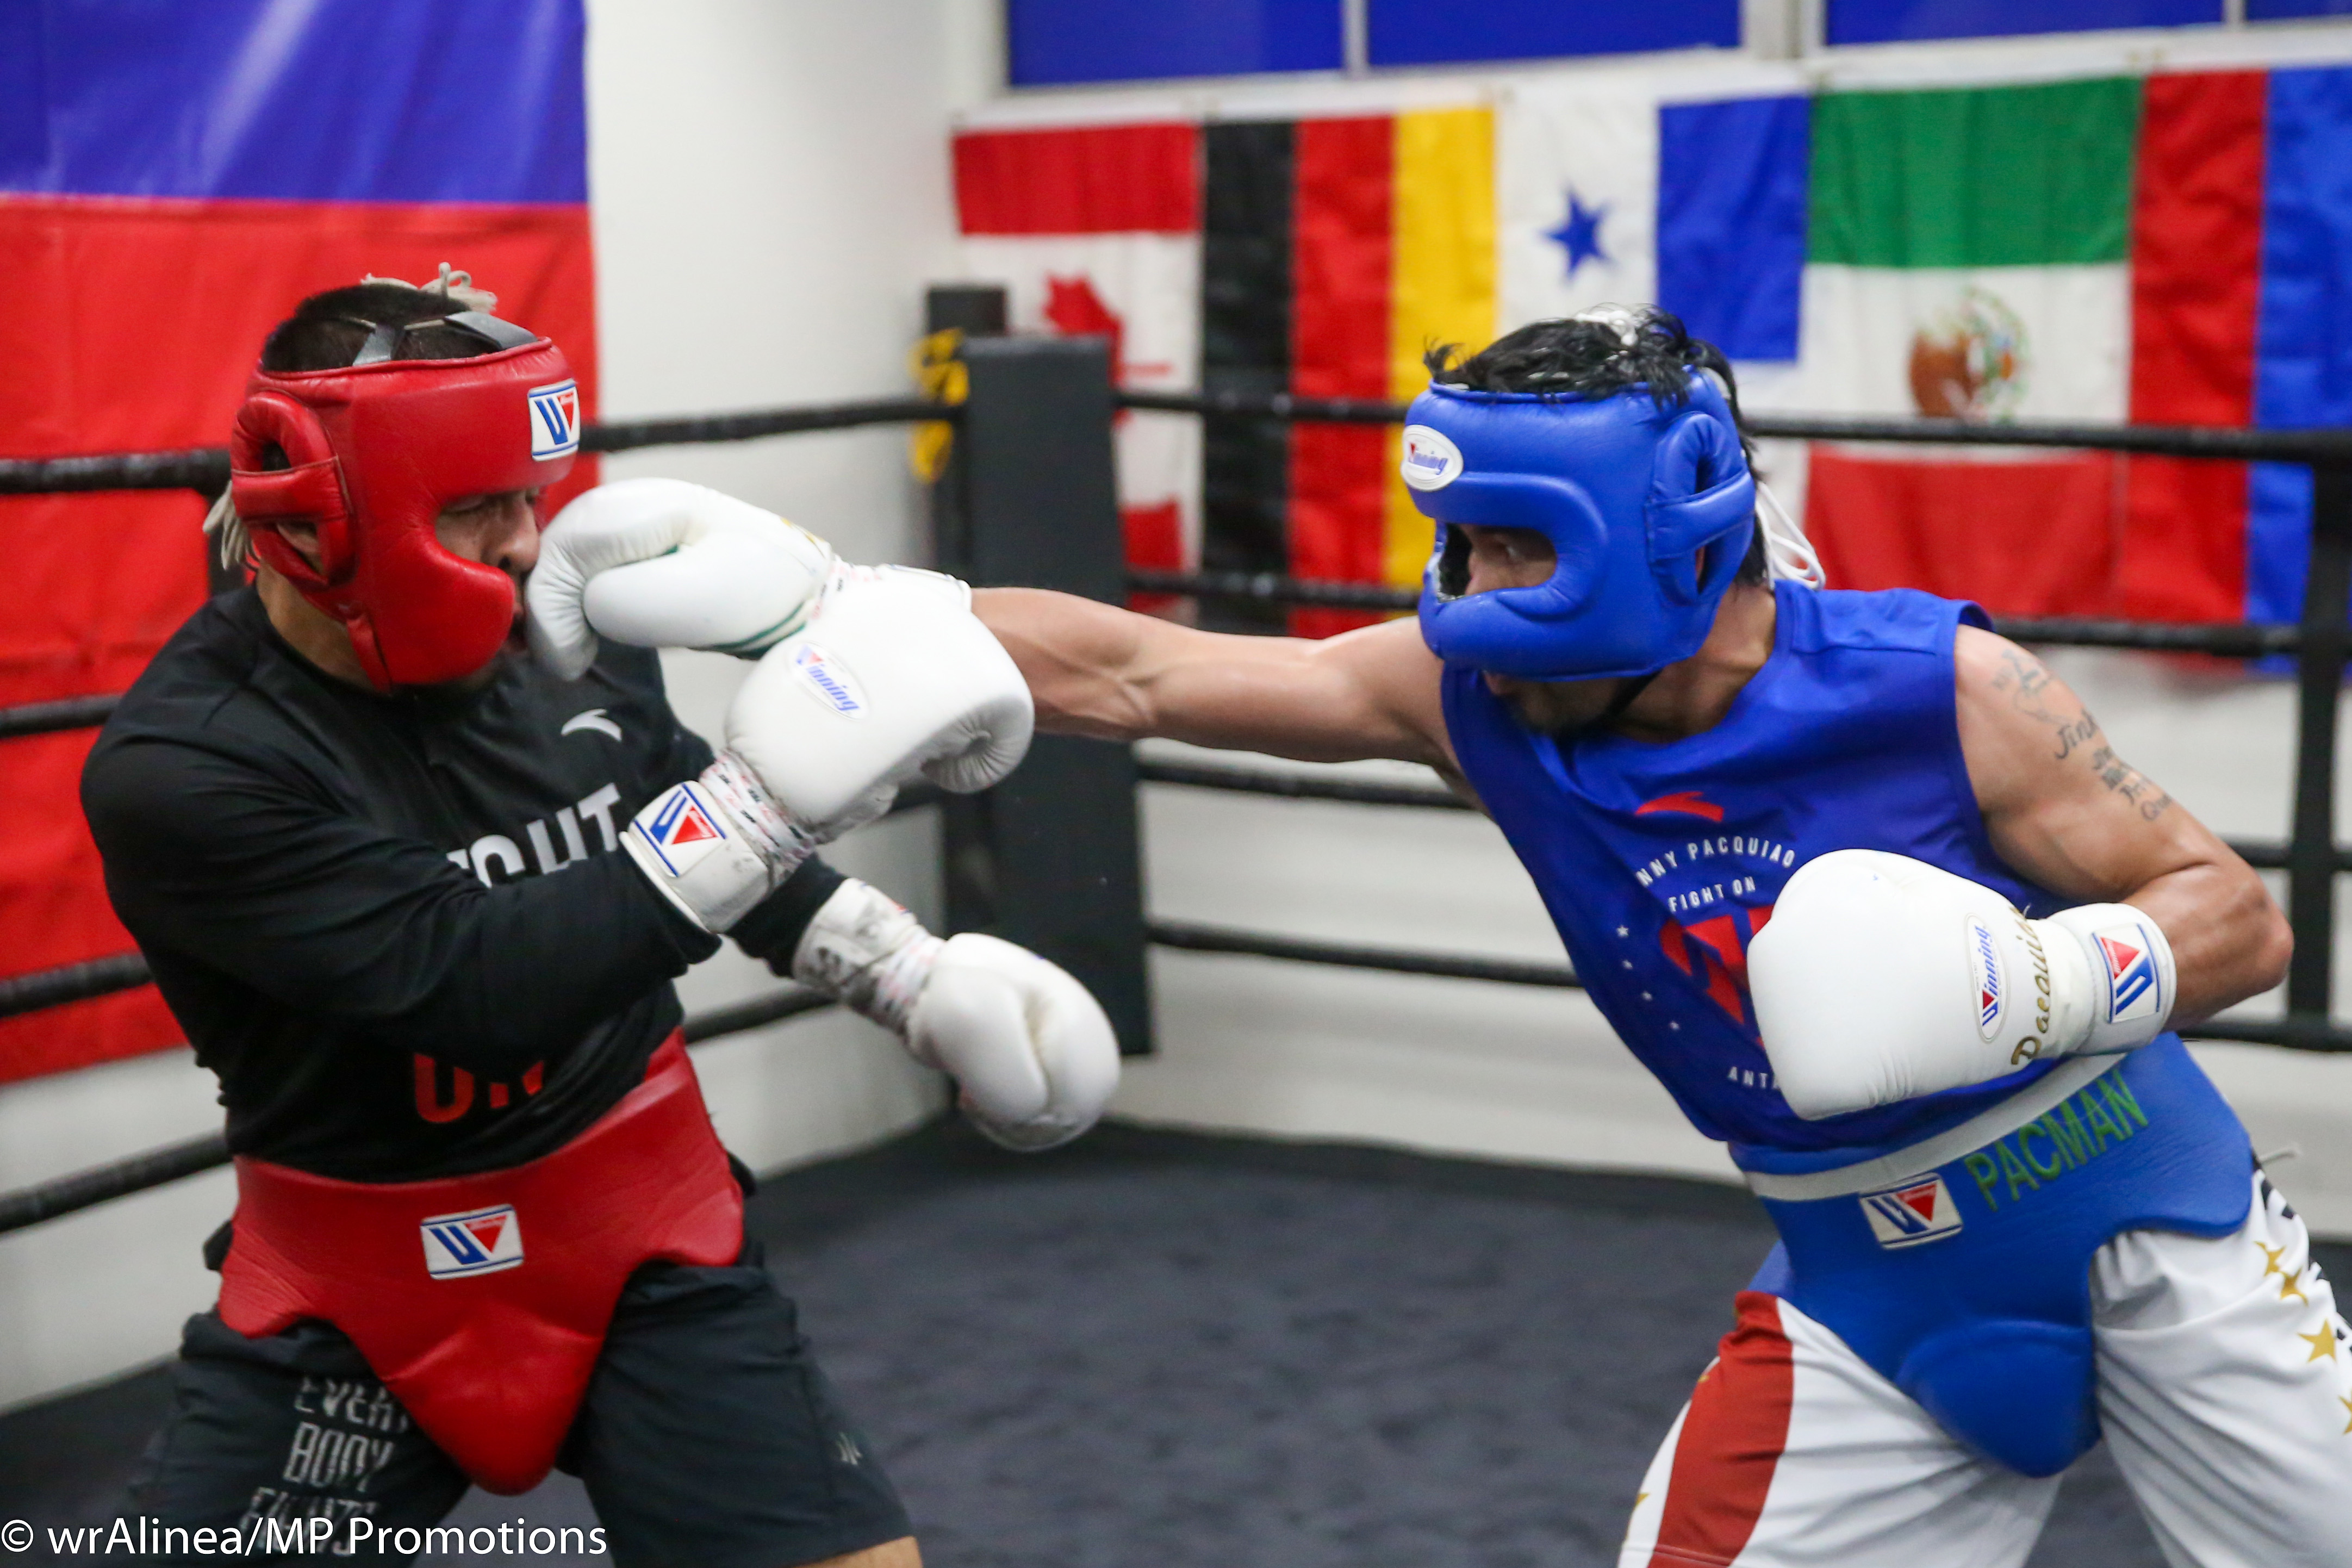 Manny Pacquiao sparring